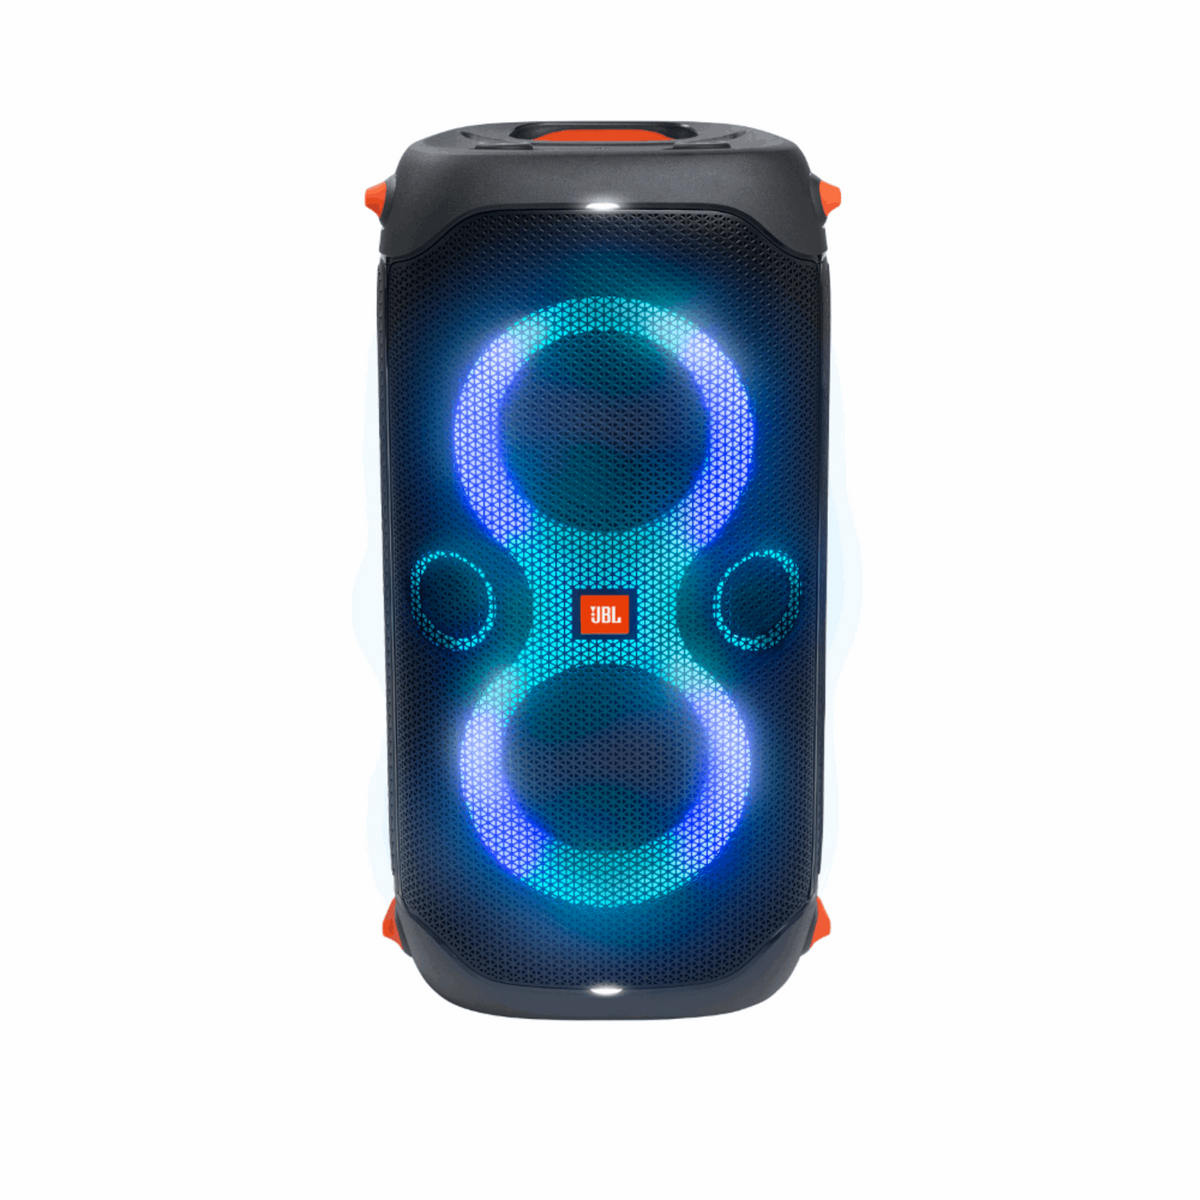 JBL PARTYBOX 110 Portable Party Speaker with 160W Powerful Sound, Built-in Lights and Splashproof Design